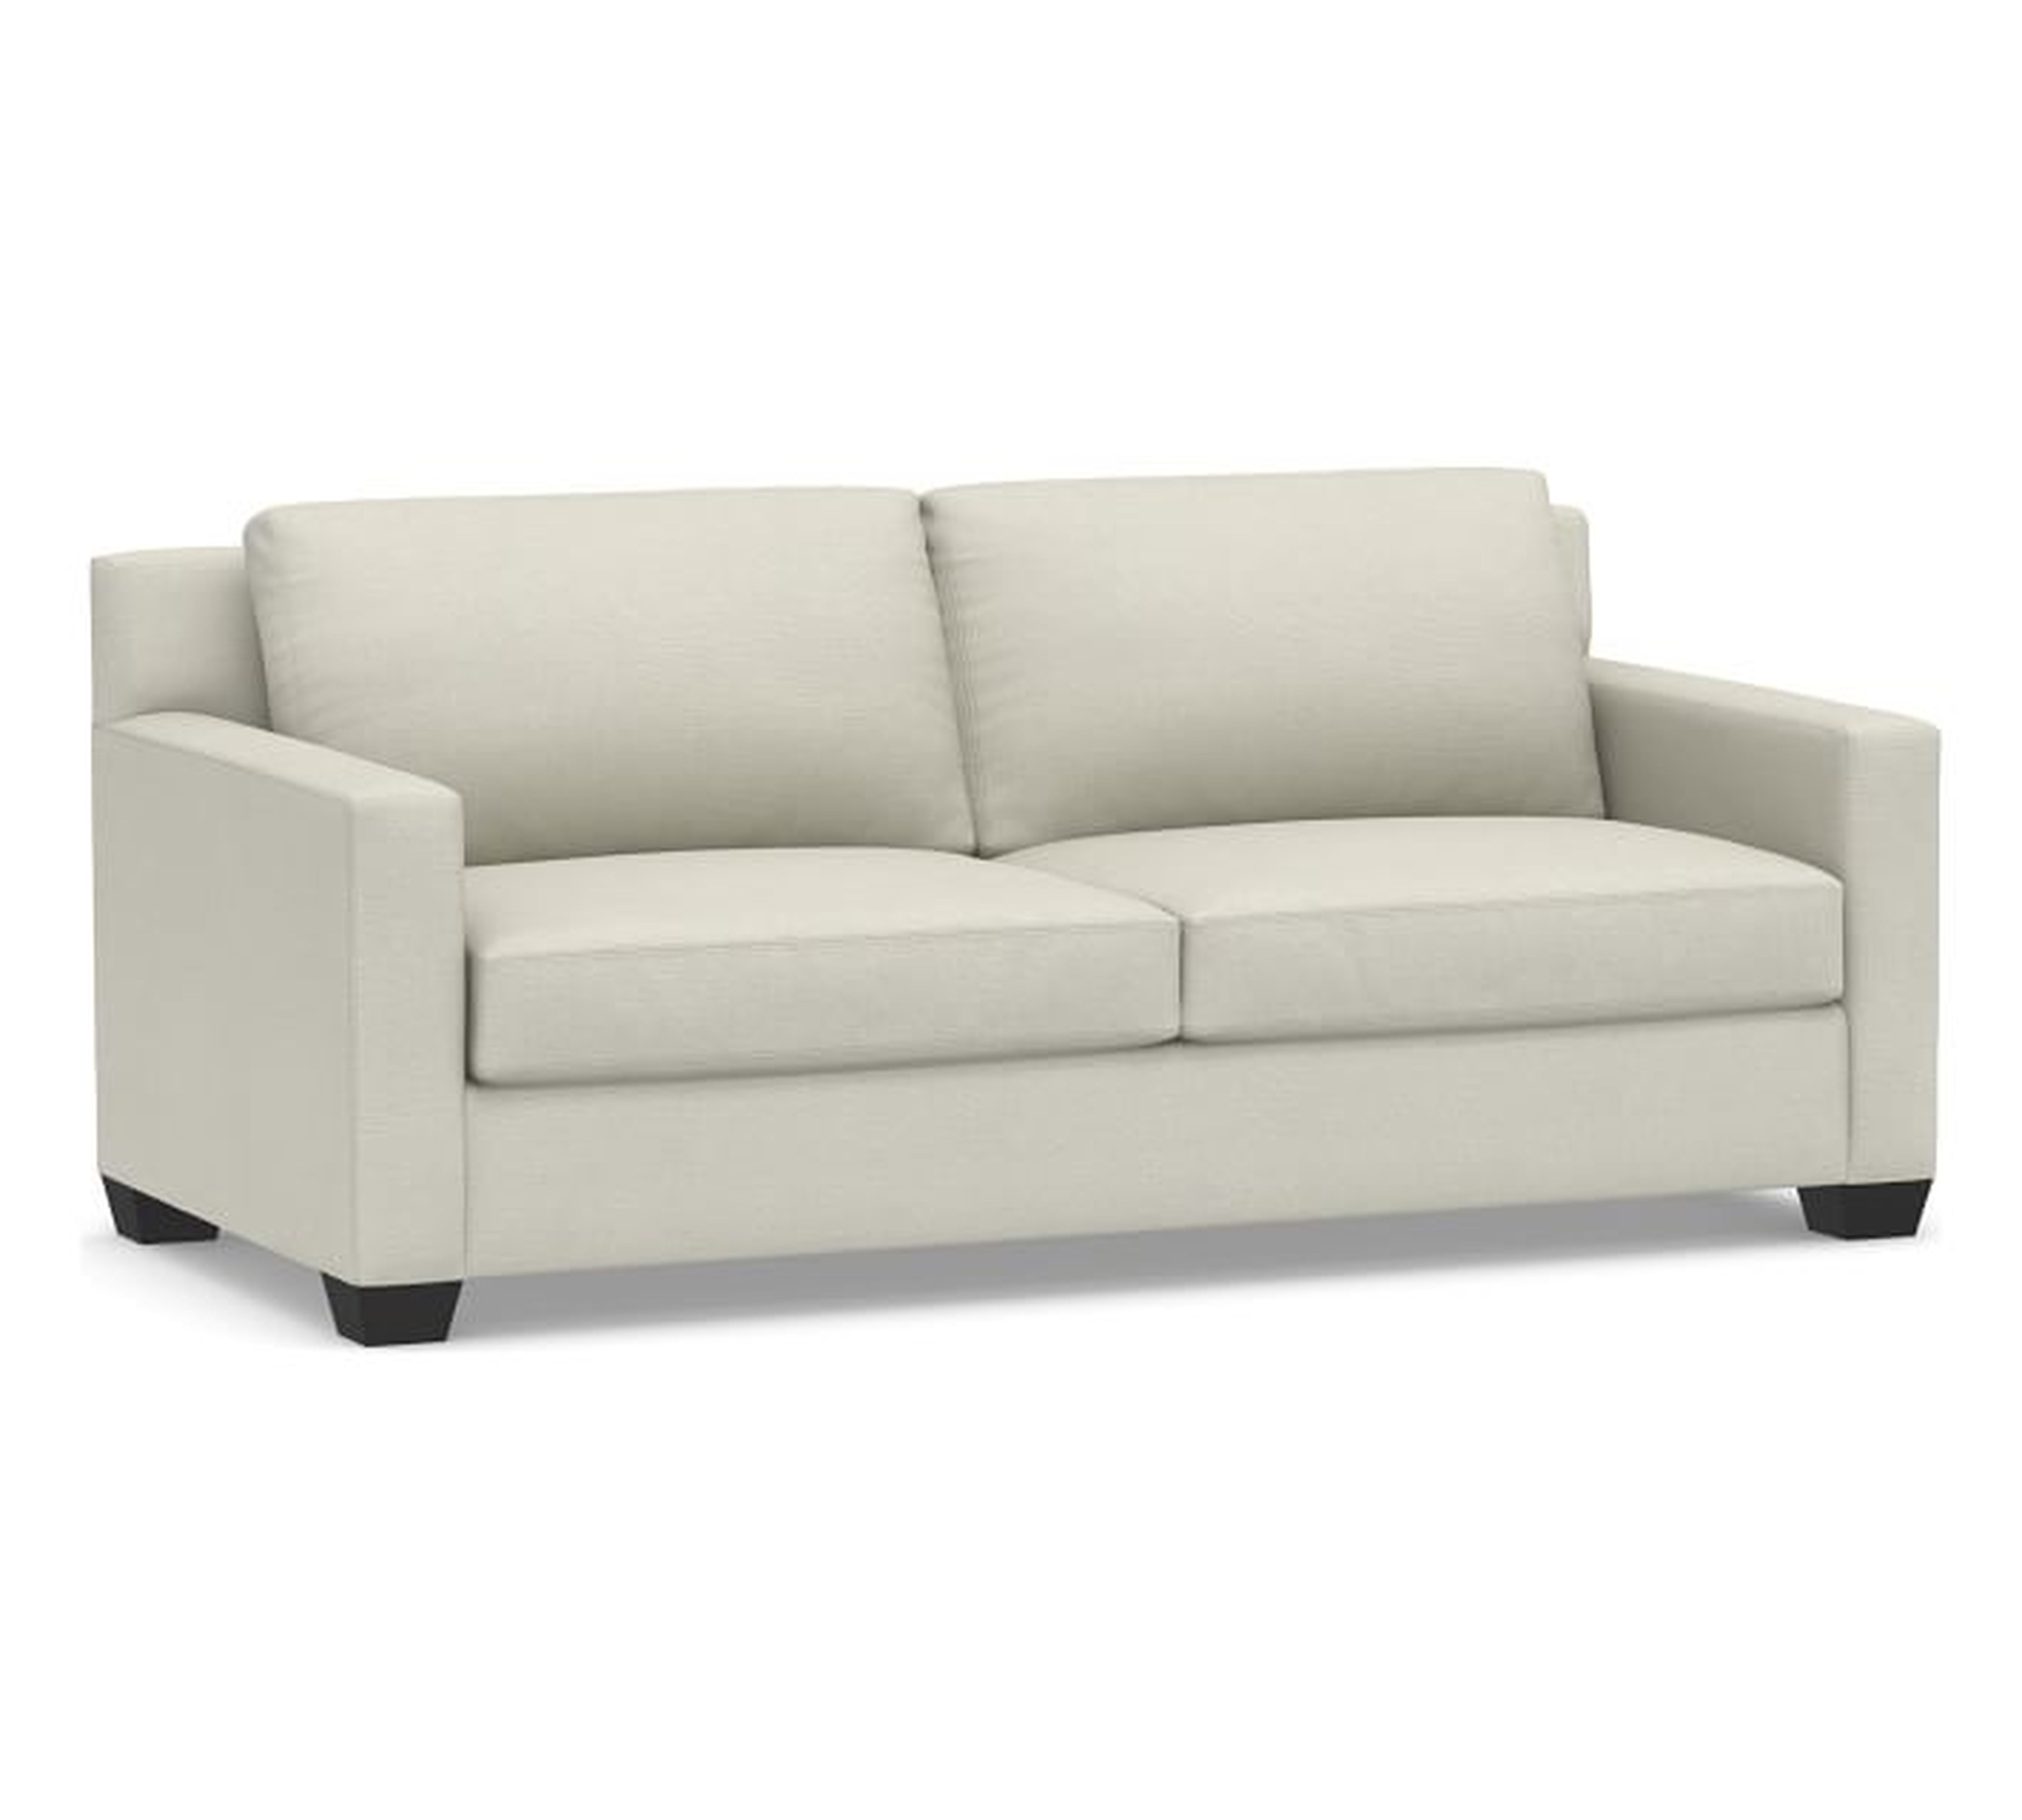 York Square Arm Upholstered Sofa 80.5", Down Blend Wrapped Cushions, Premium Performance Basketweave Pebble - Pottery Barn